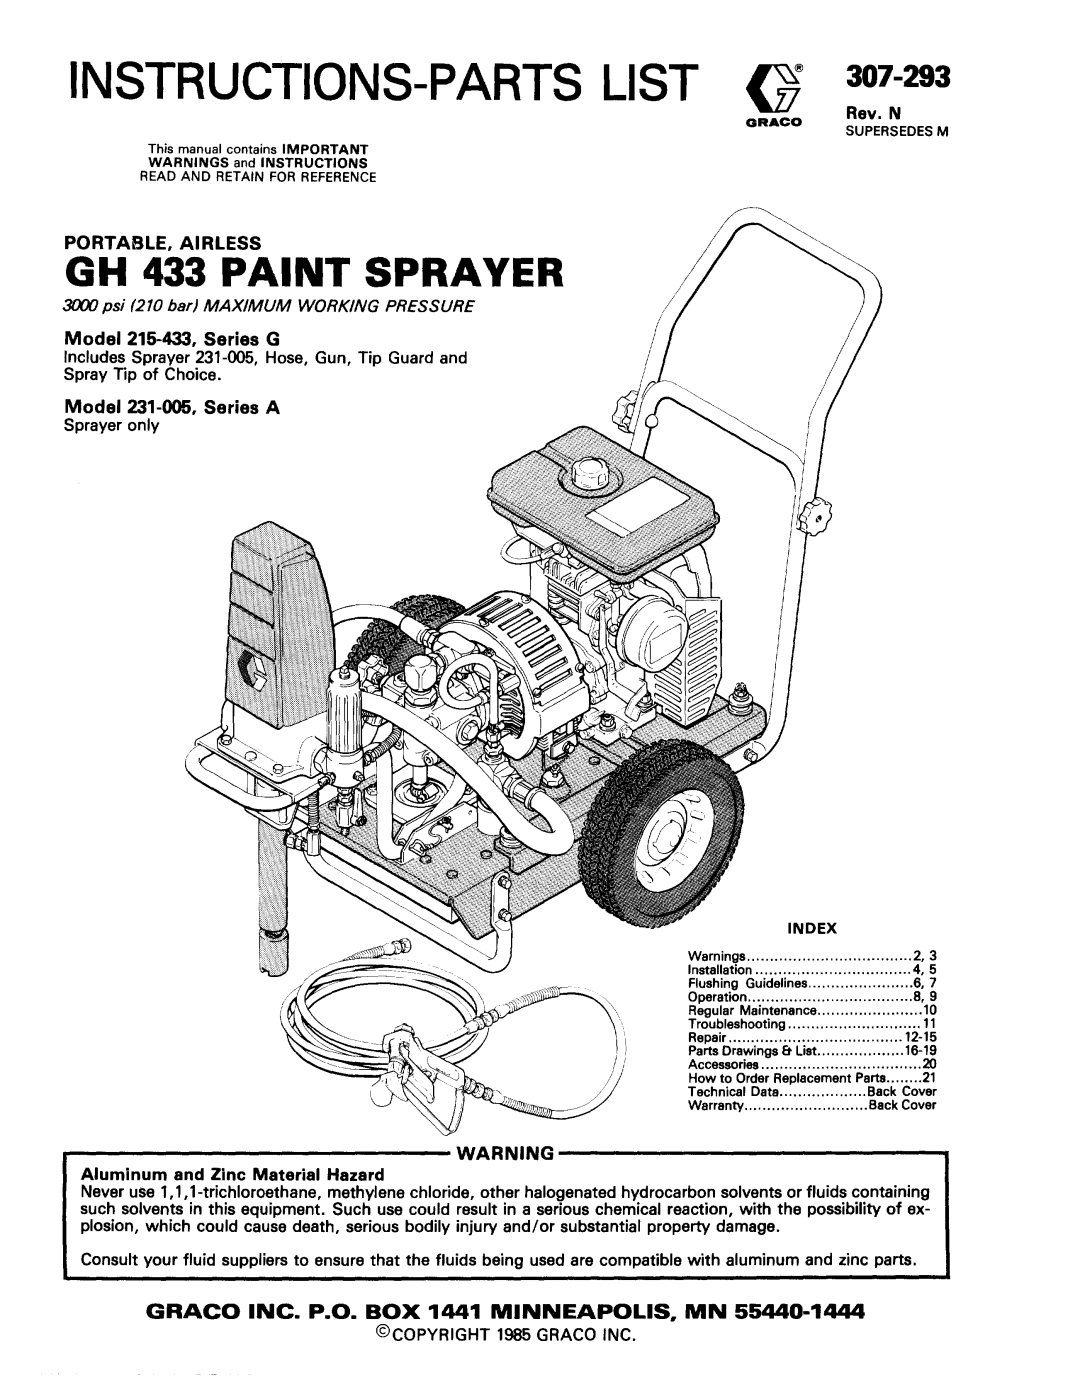 Graco Series C important safety instructions Instructions–PartsList, Model 238620, Series A, Model 214724, Series E 